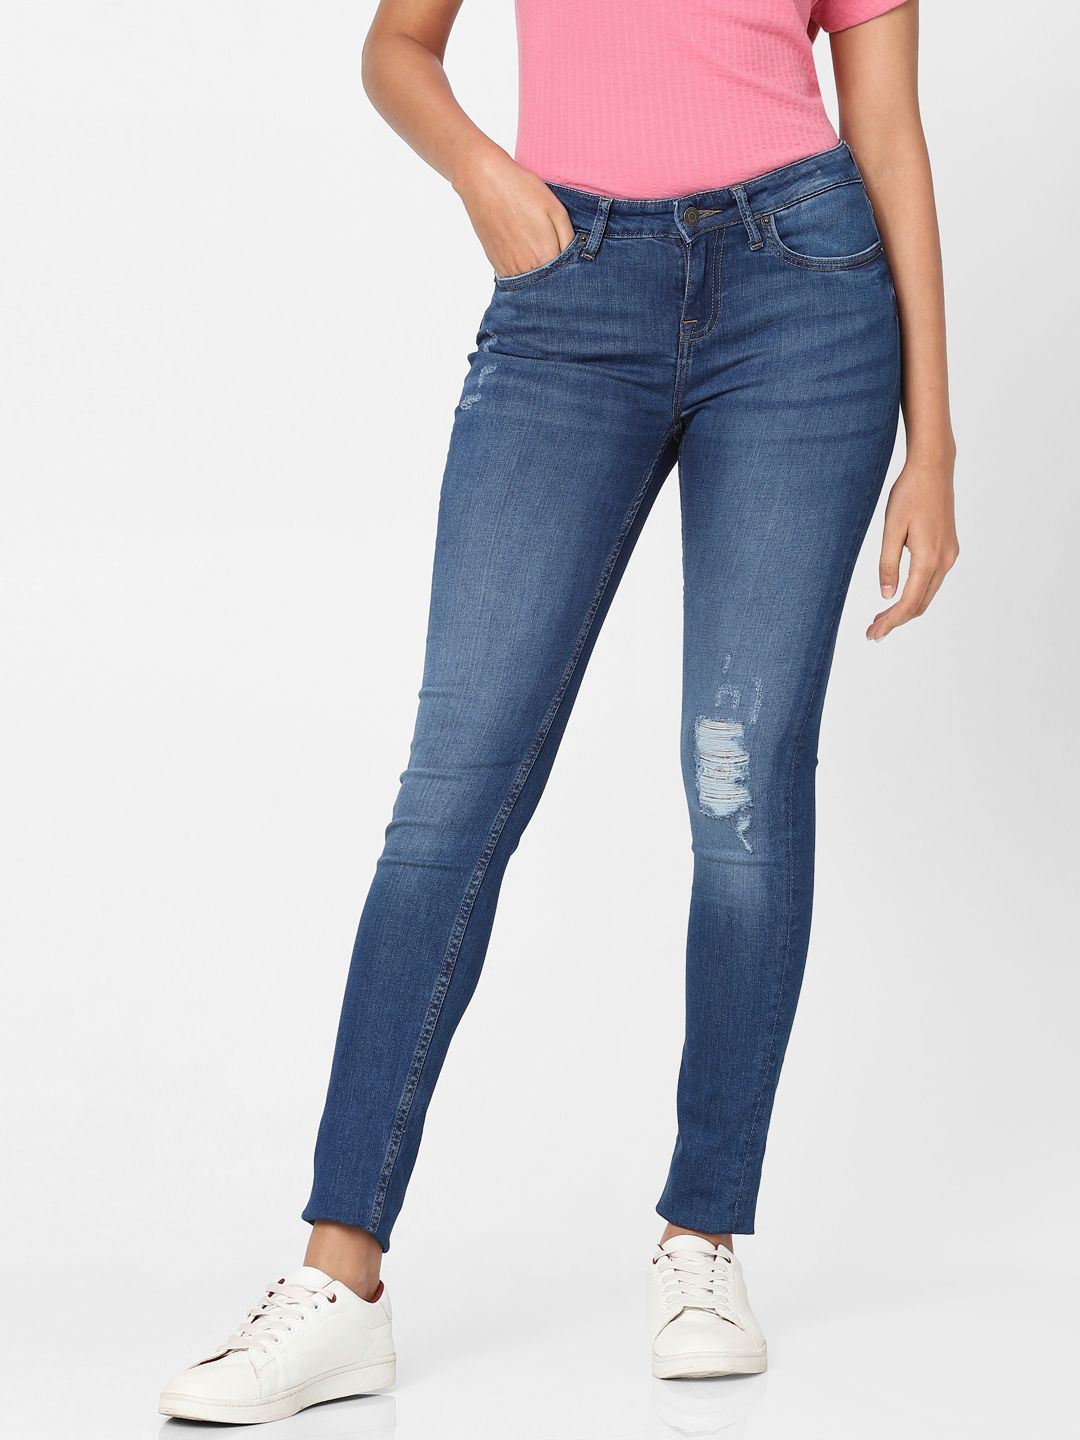 Vero Moda Women Blue Skinny Fit Mildly Distressed Mid Rise  Stretchable Light Fade Jeans Price in India